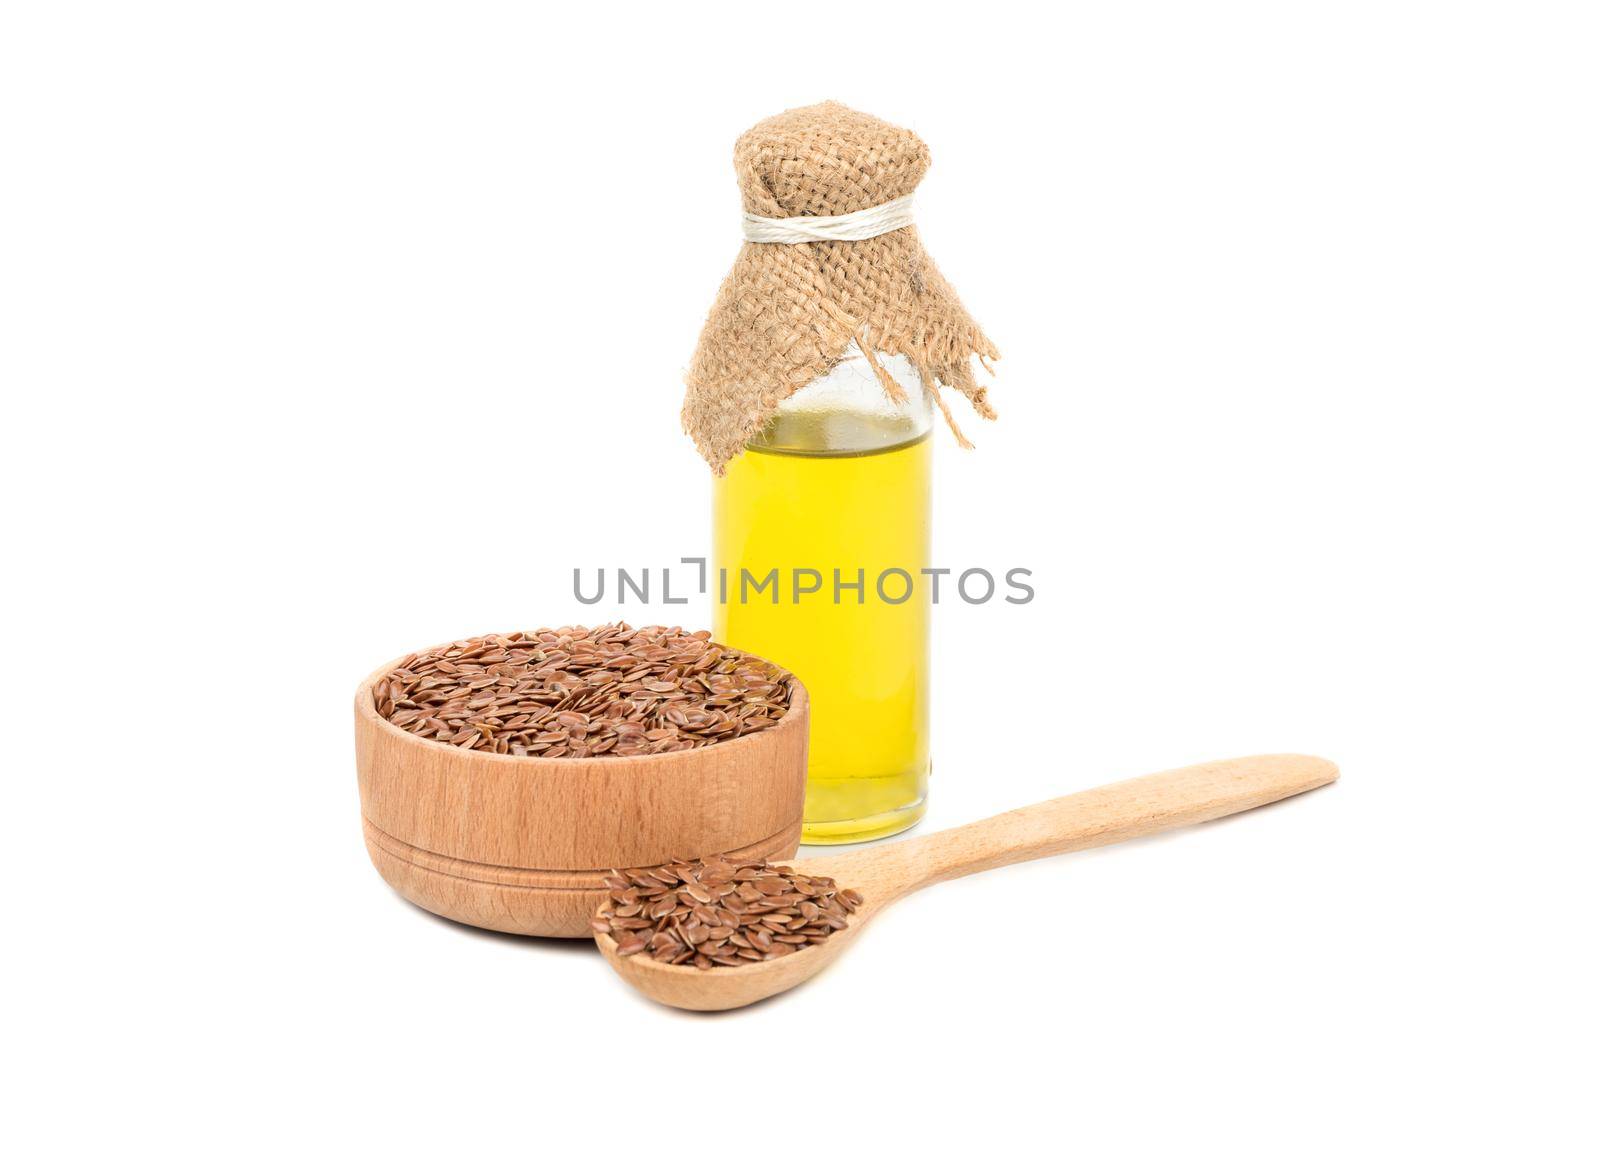 Bowl, spoon with seeds and a bottle of linseed oil on white background